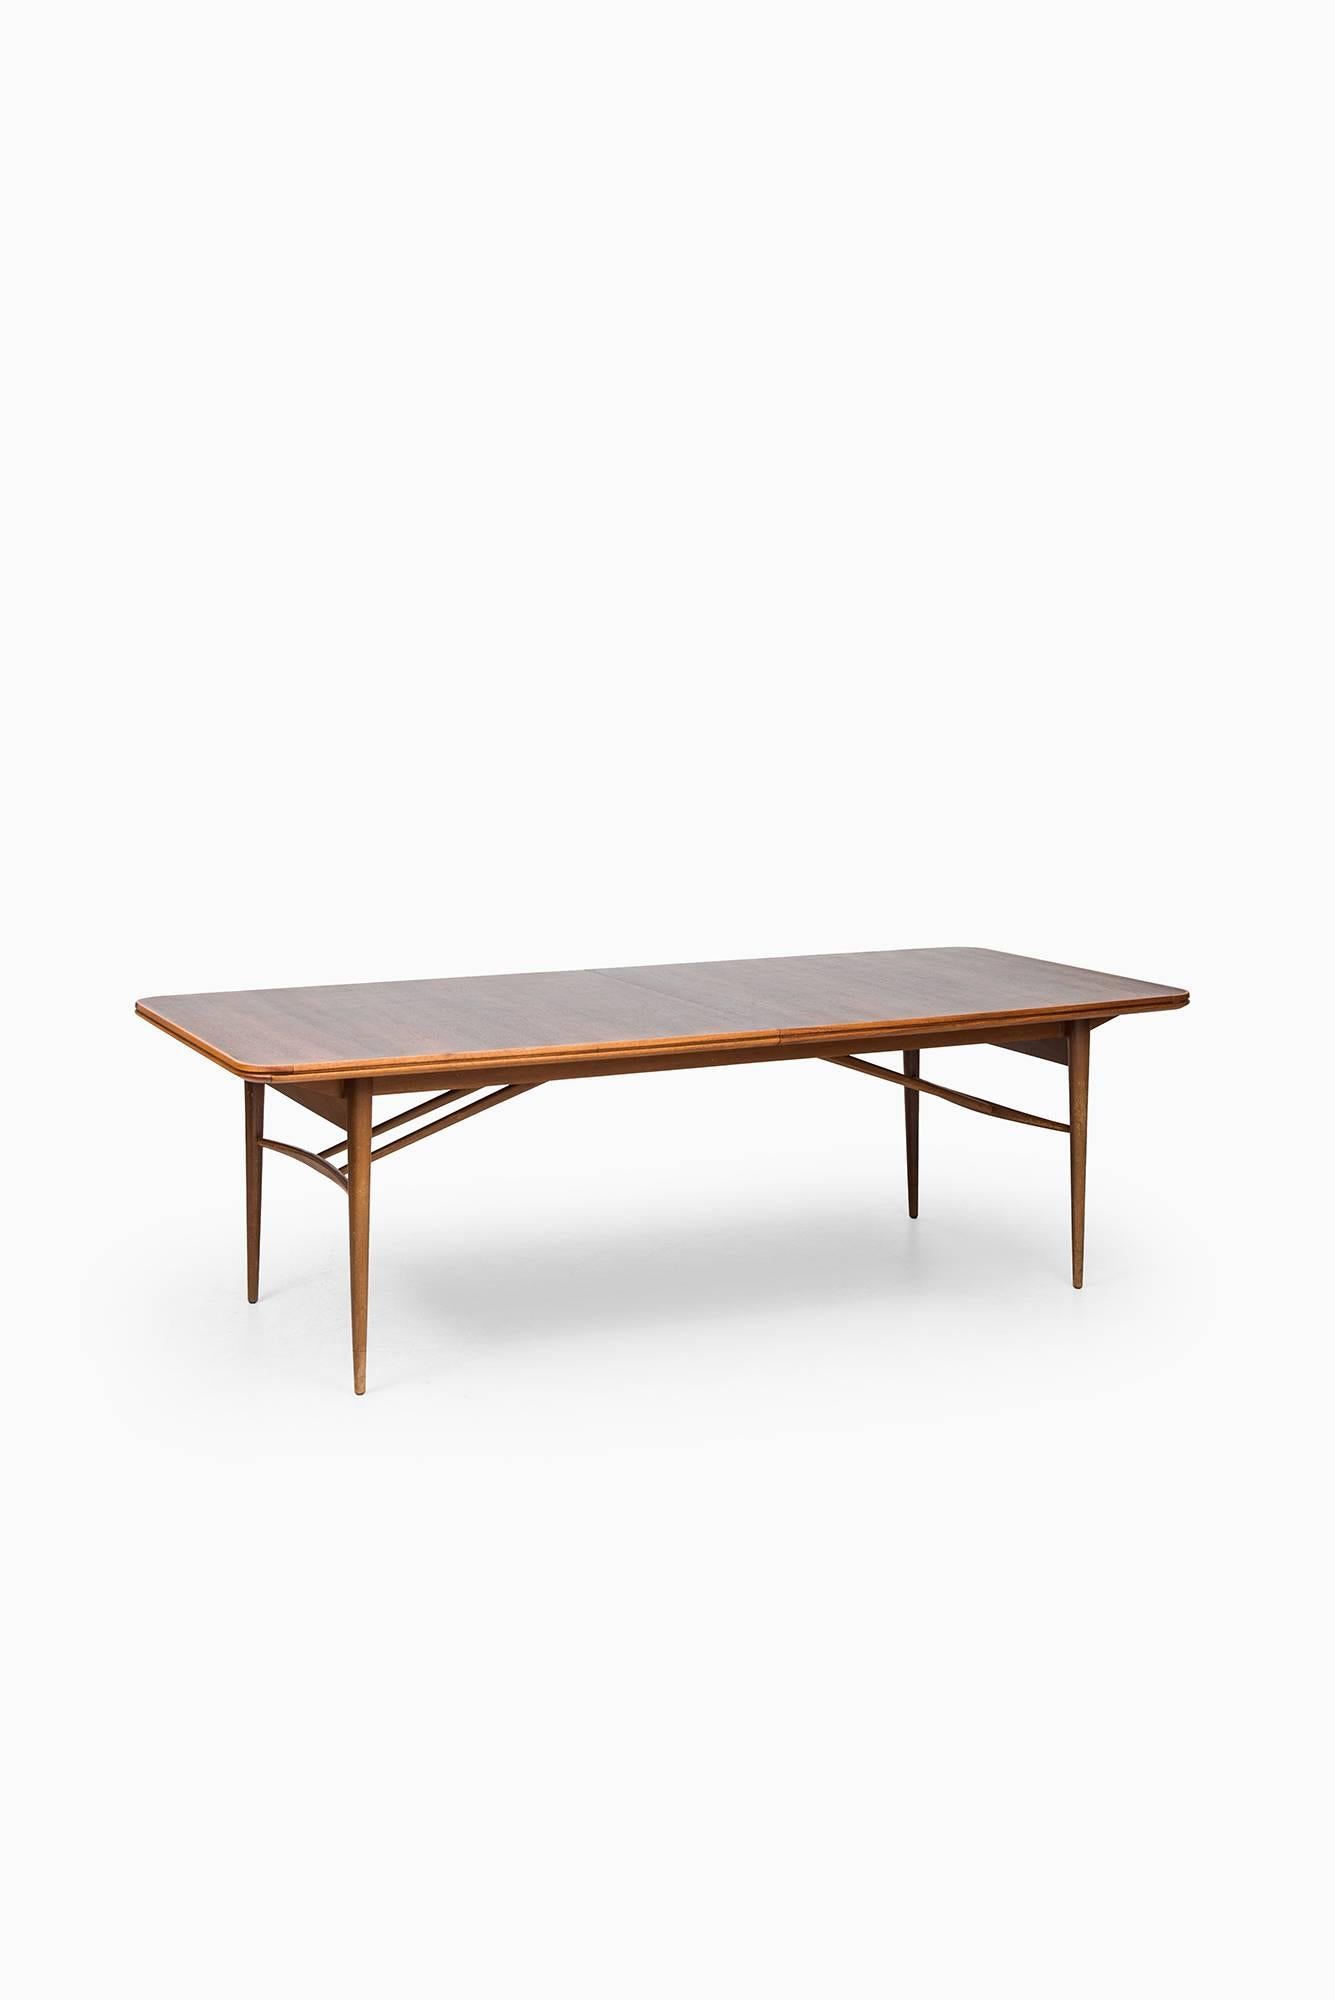 Very rare and large dining table/conference table. Produced in Denmark.